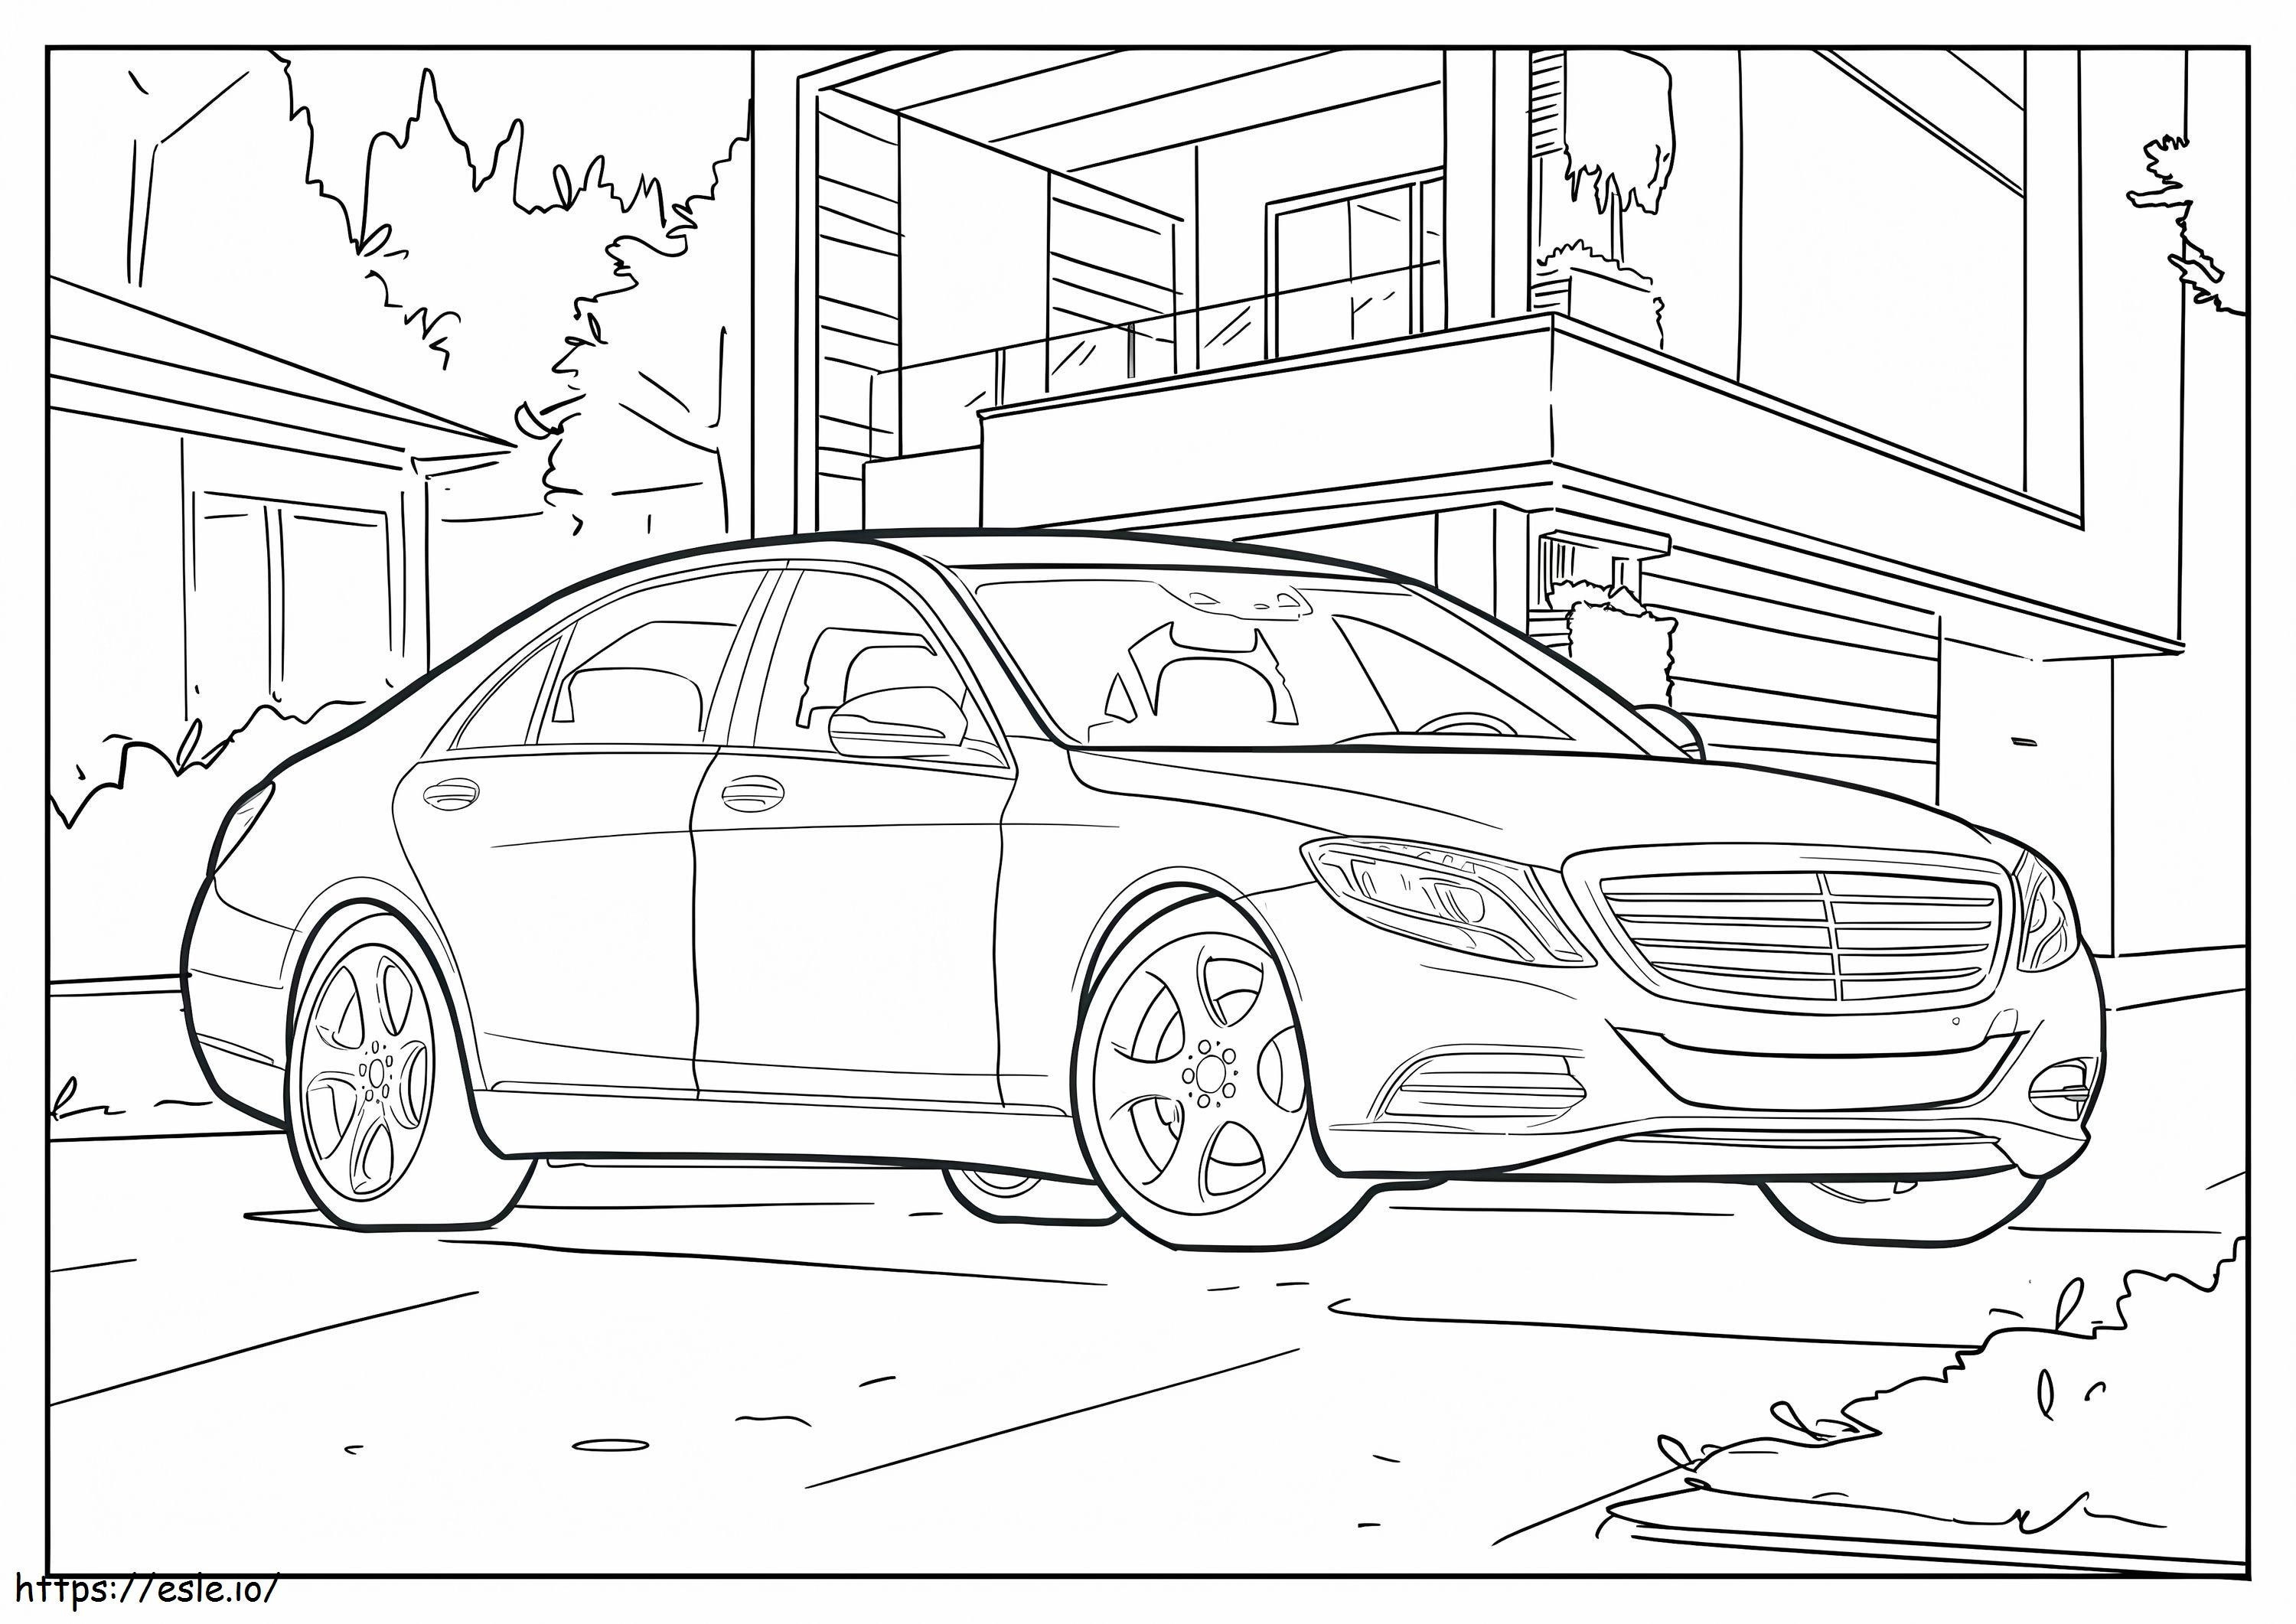 Mercedes Benz 4 Sports Car coloring page